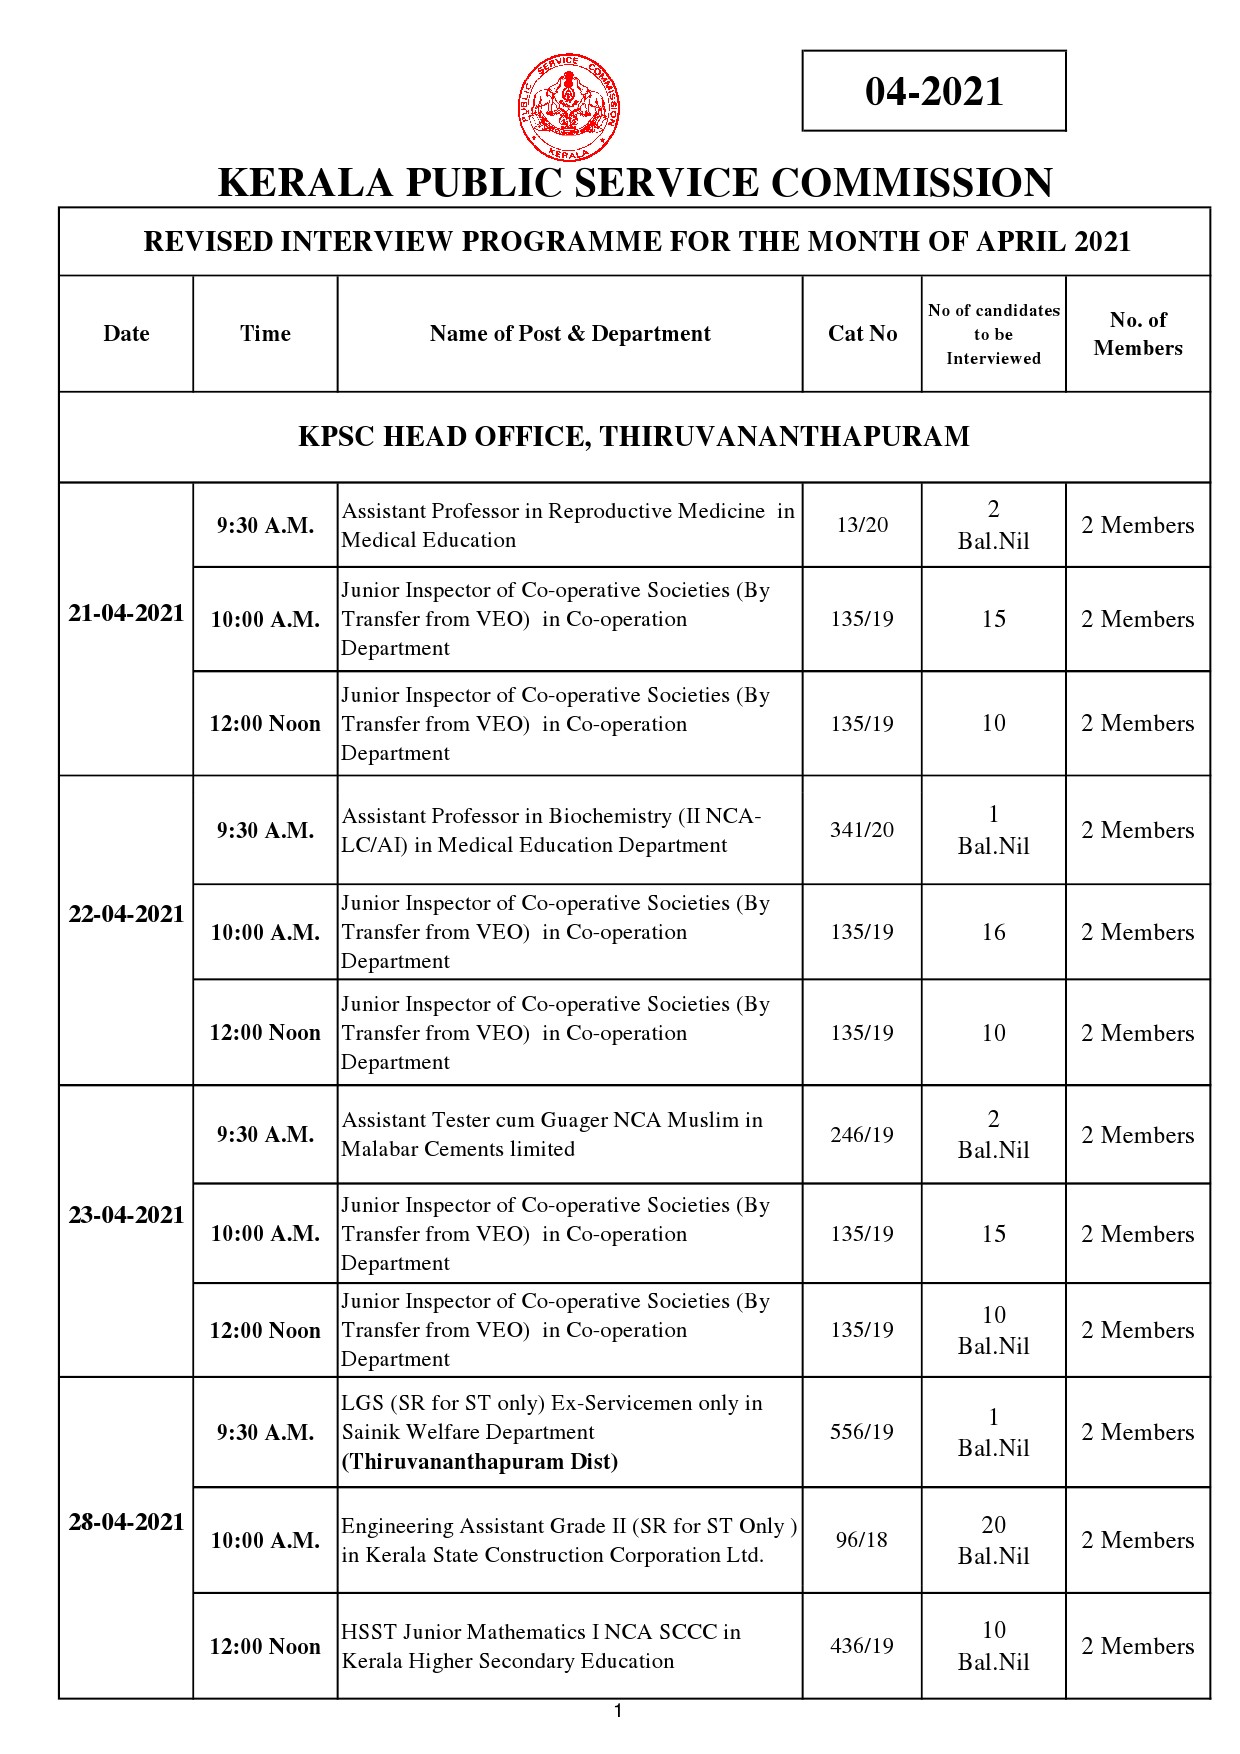 REVISED INTERVIEW PROGRAMME FOR THE MONTH OF APRIL 2021 - Notification Image 1